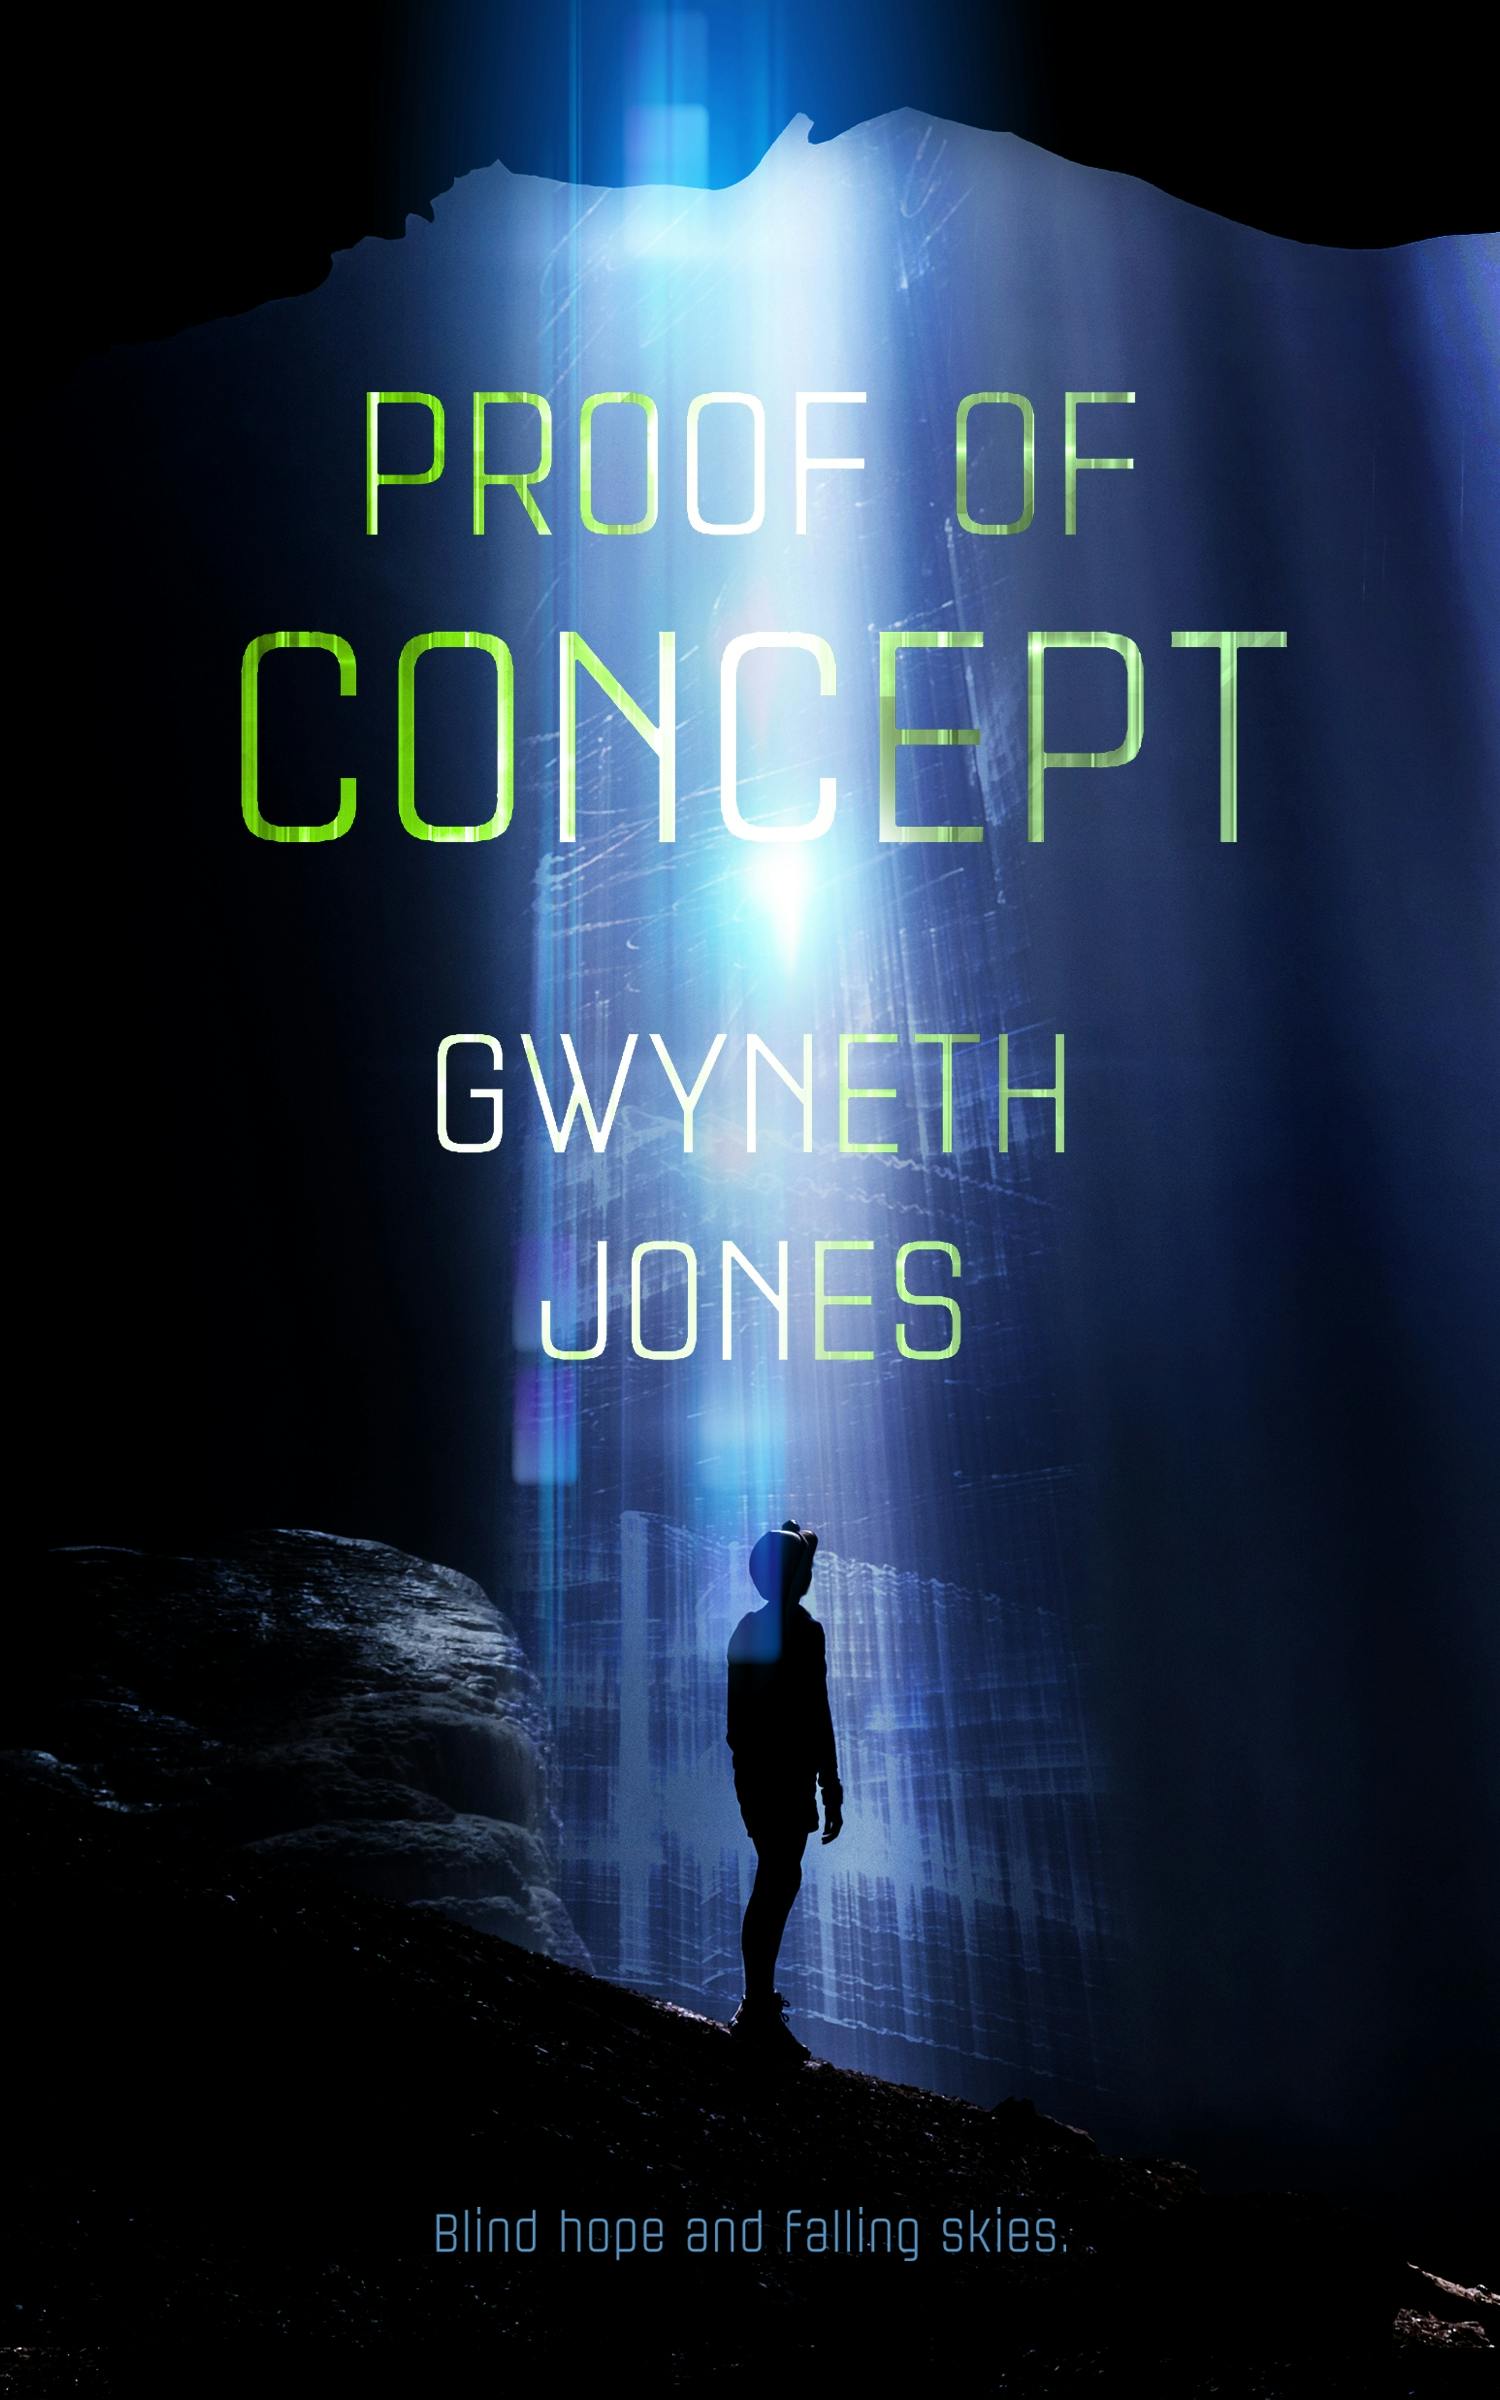 Cover for the book titled as: Proof of Concept